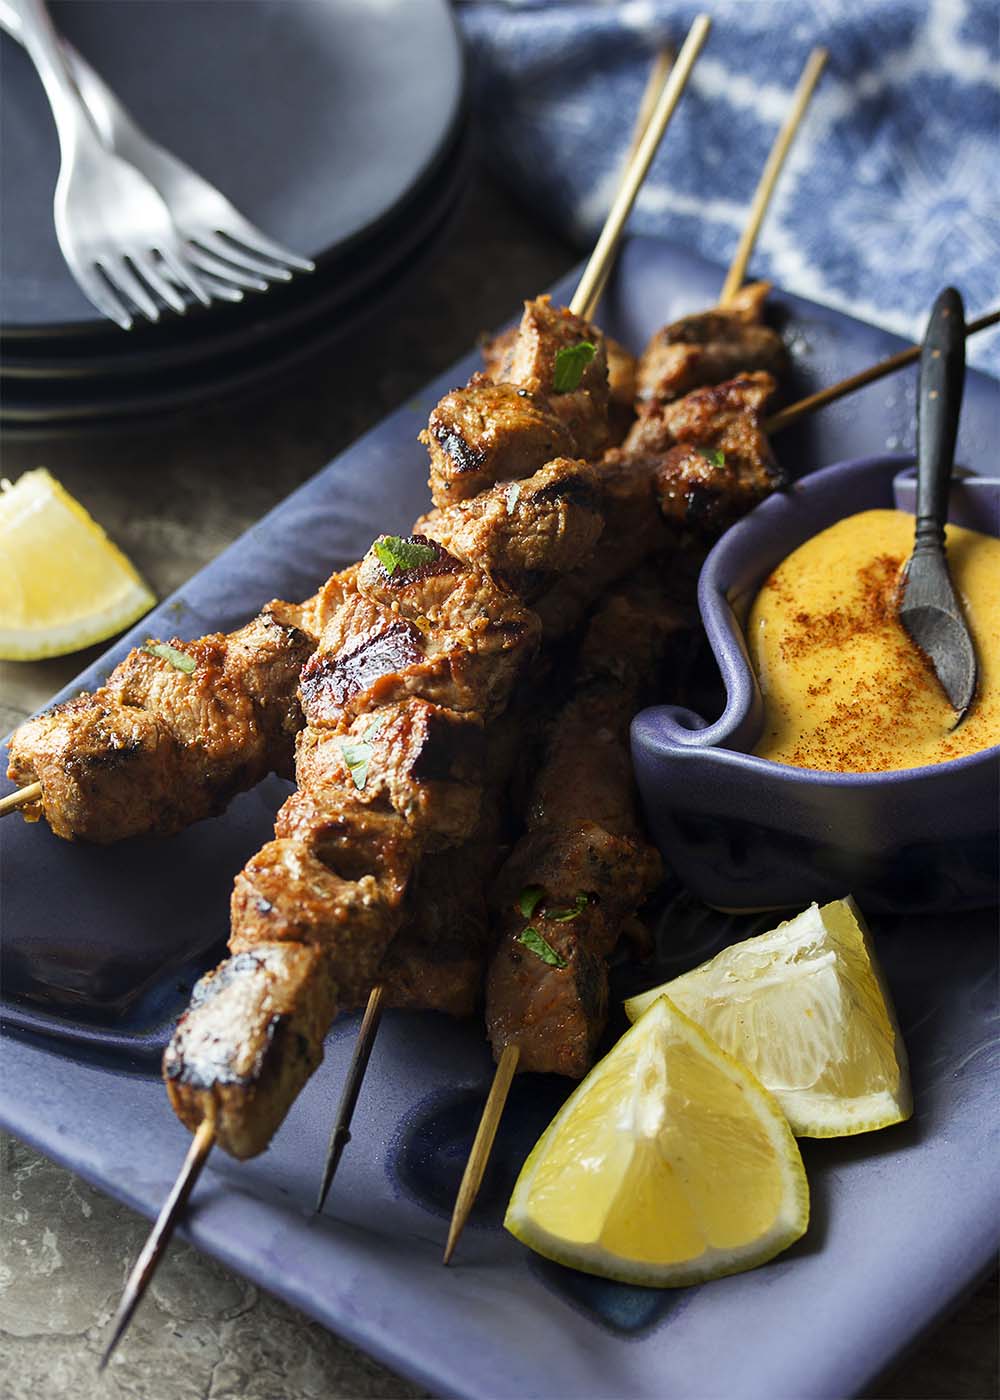 Long skewers of pinchos morunos on a blue serving platter with wedges of lemon and a bowl of aioli.